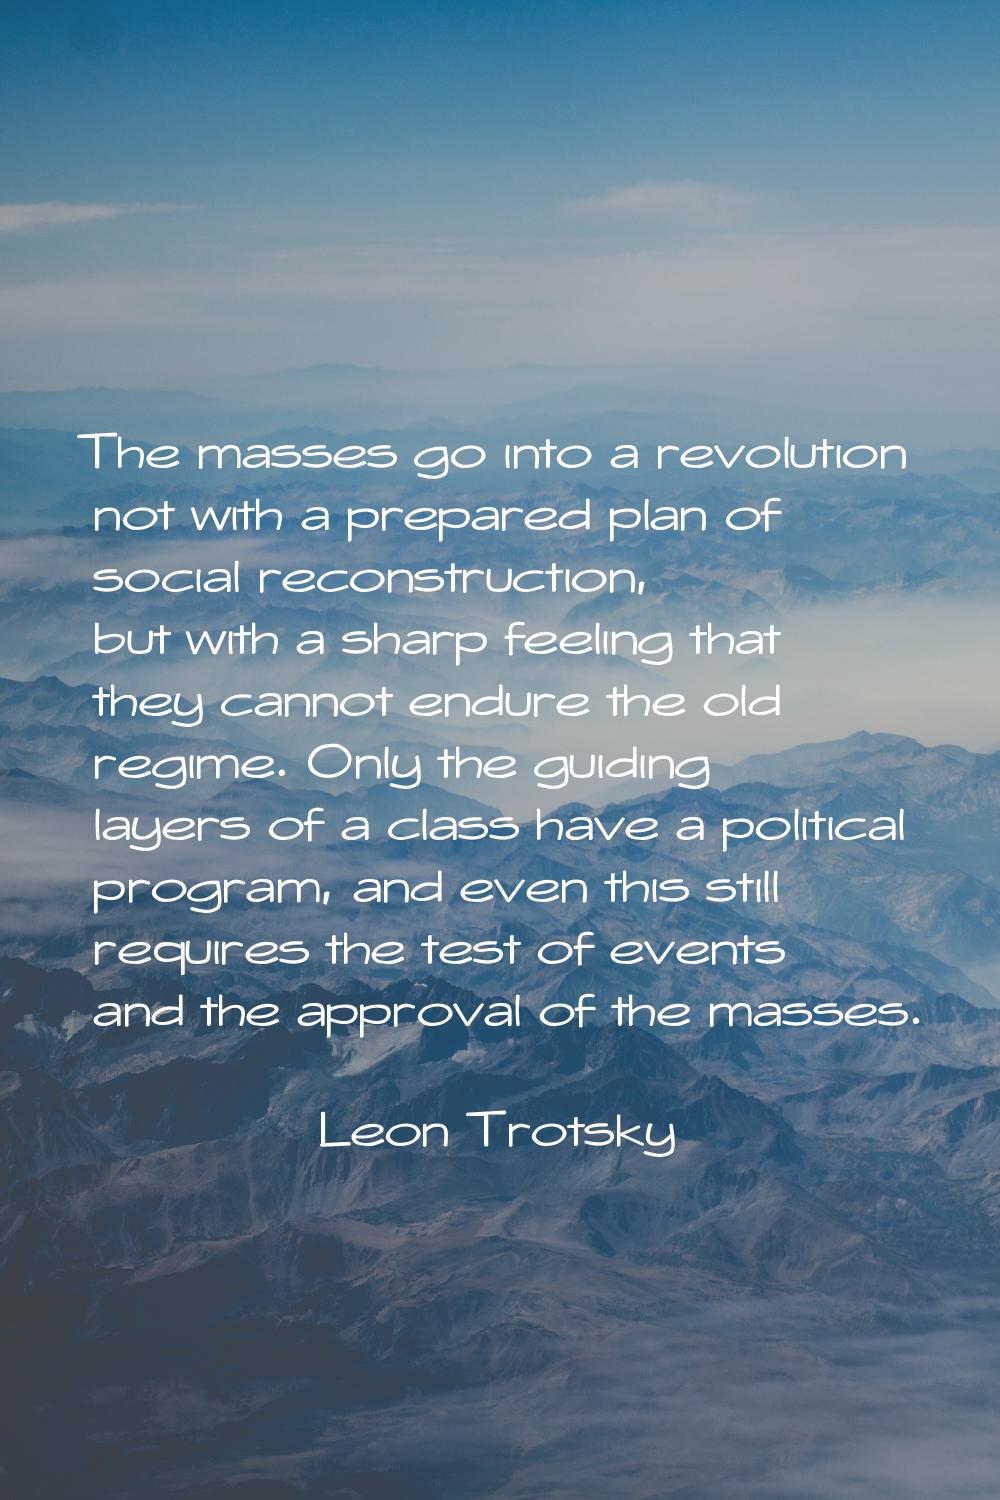 The masses go into a revolution not with a prepared plan of social reconstruction, but with a sharp